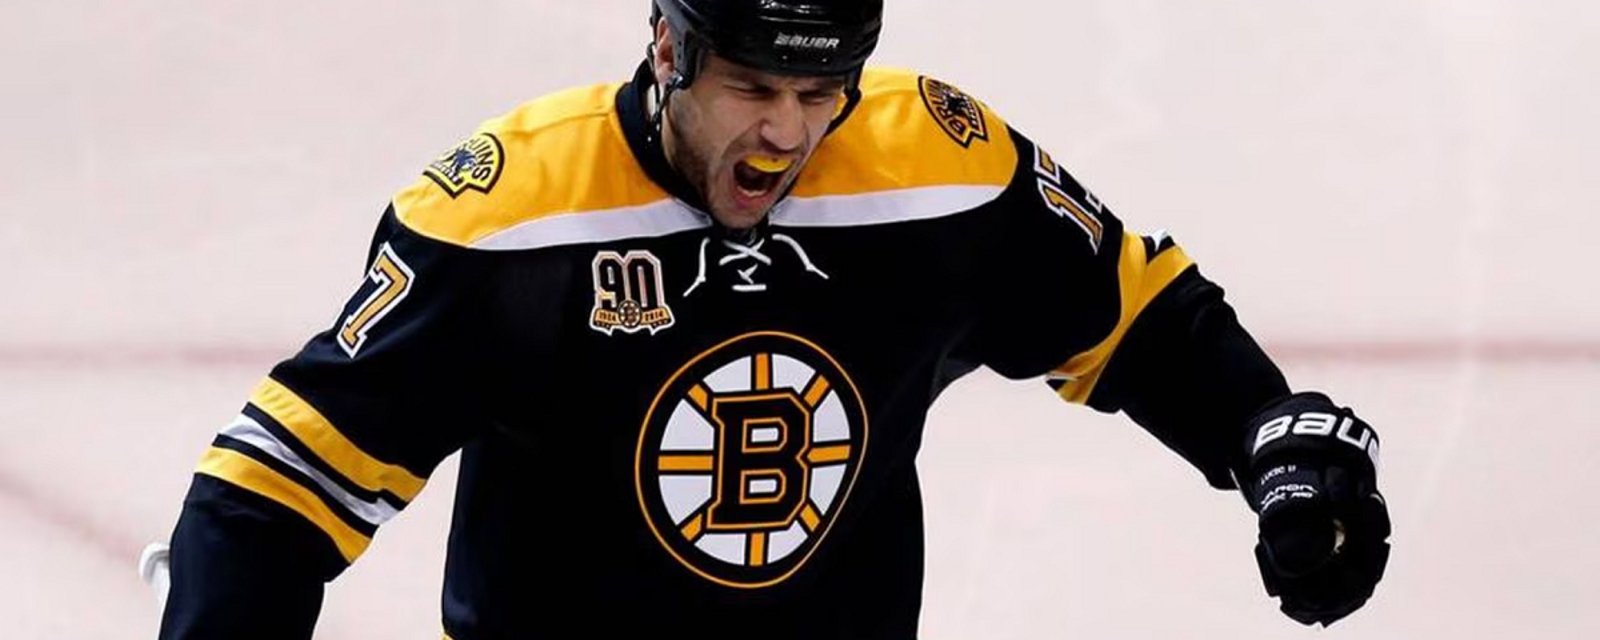 Milan Lucic leaves the Bruins after alleged domestic incident.